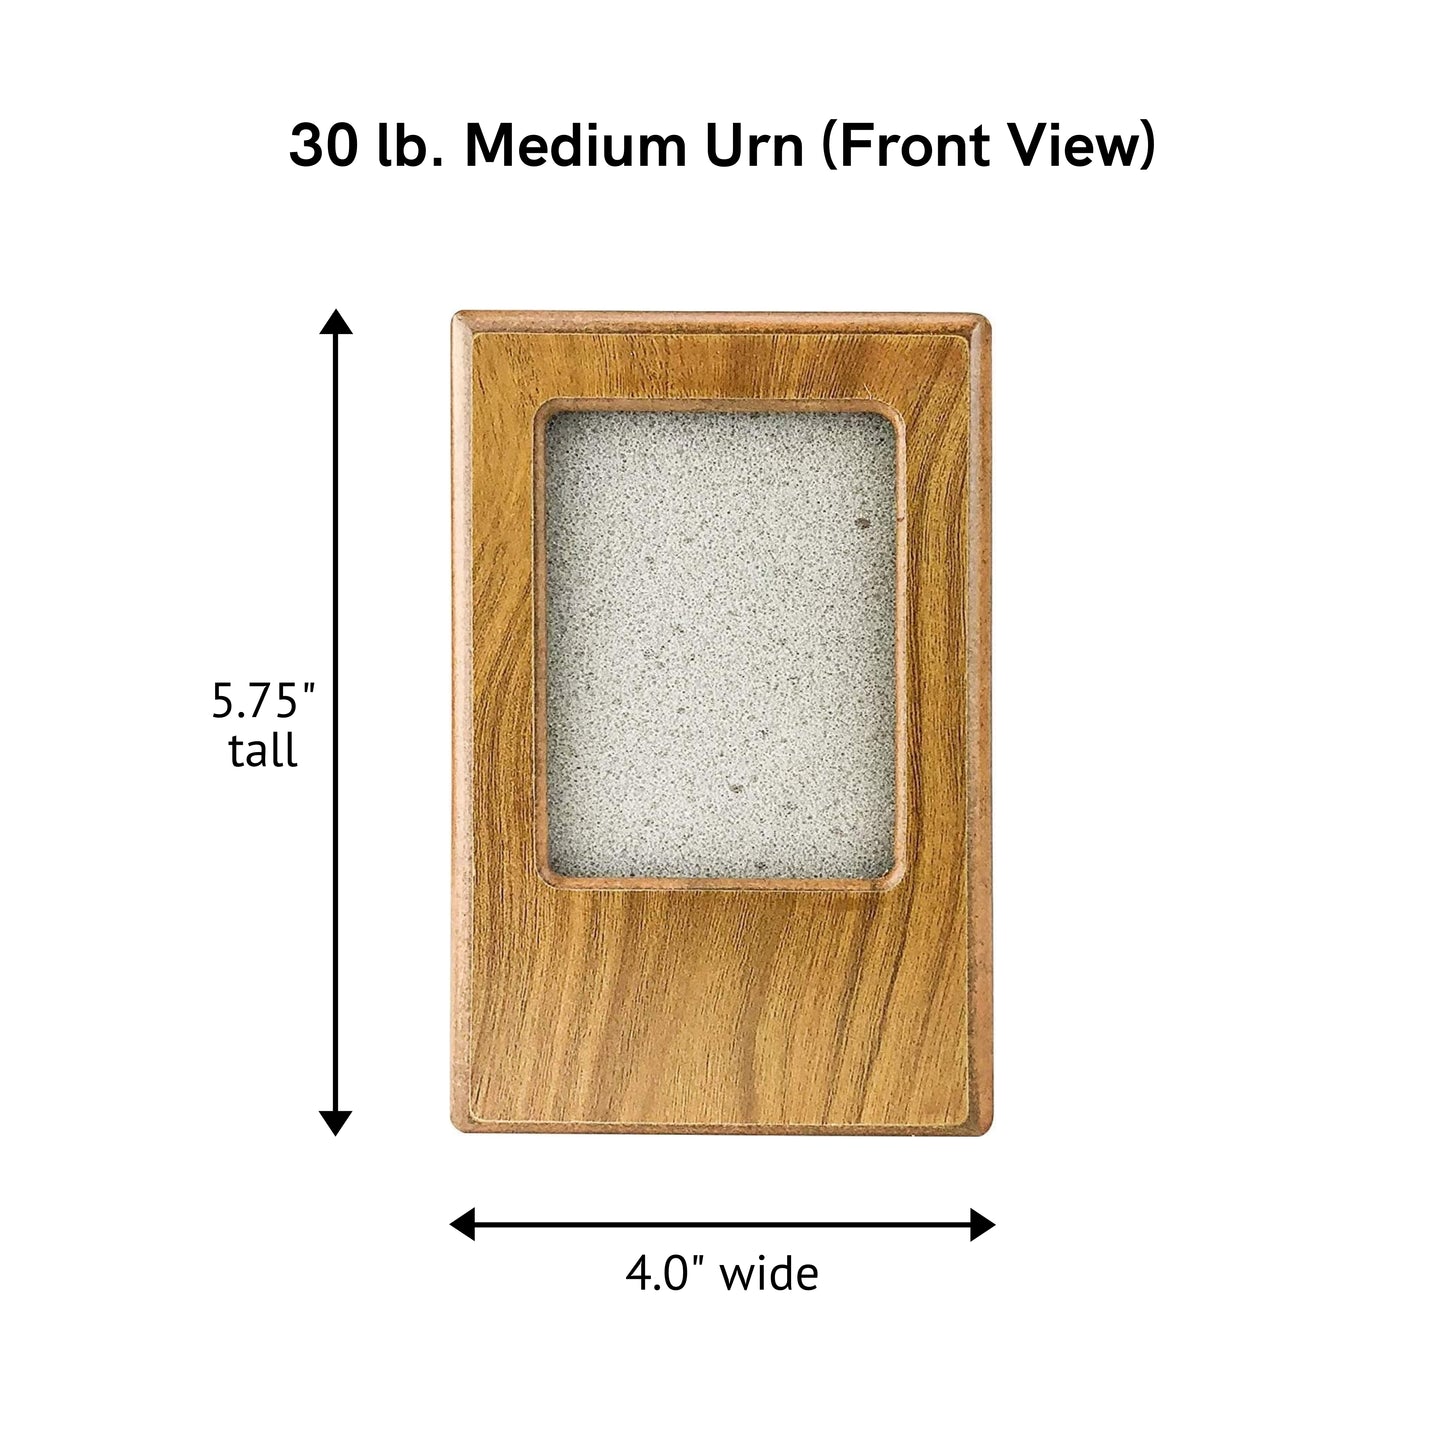 Midlee Oak Picture Frame Pet Urn 5.75" x 4" x 4.25", up to 30lbs Pet